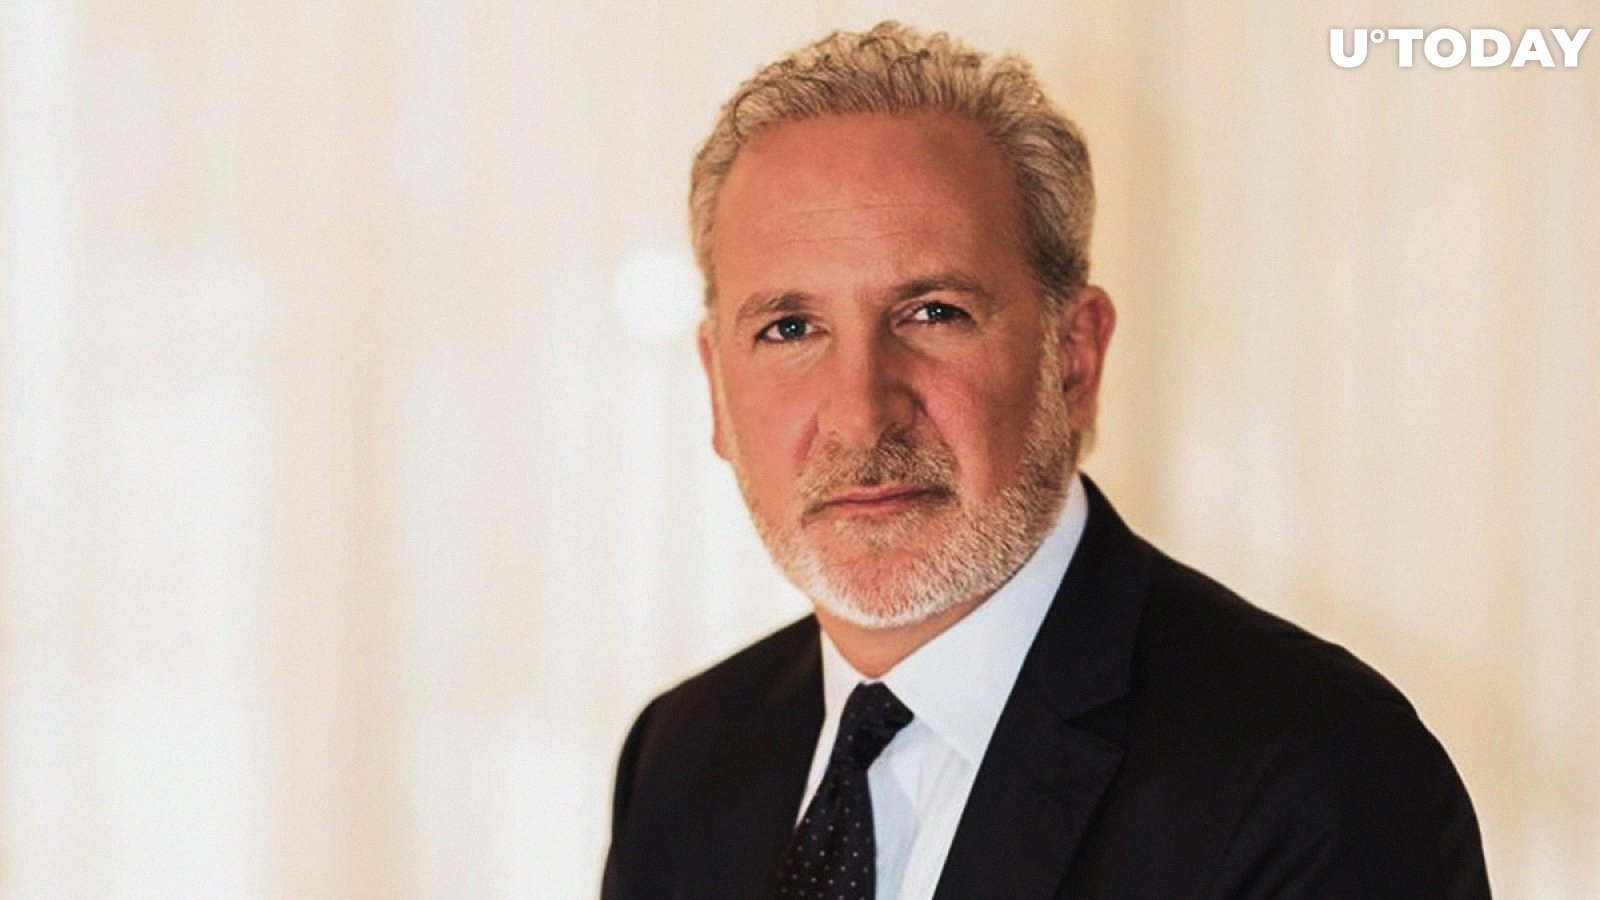 Peter Schiff Slammed by Bitcoin Community Over Gold Being Inflation Hedge